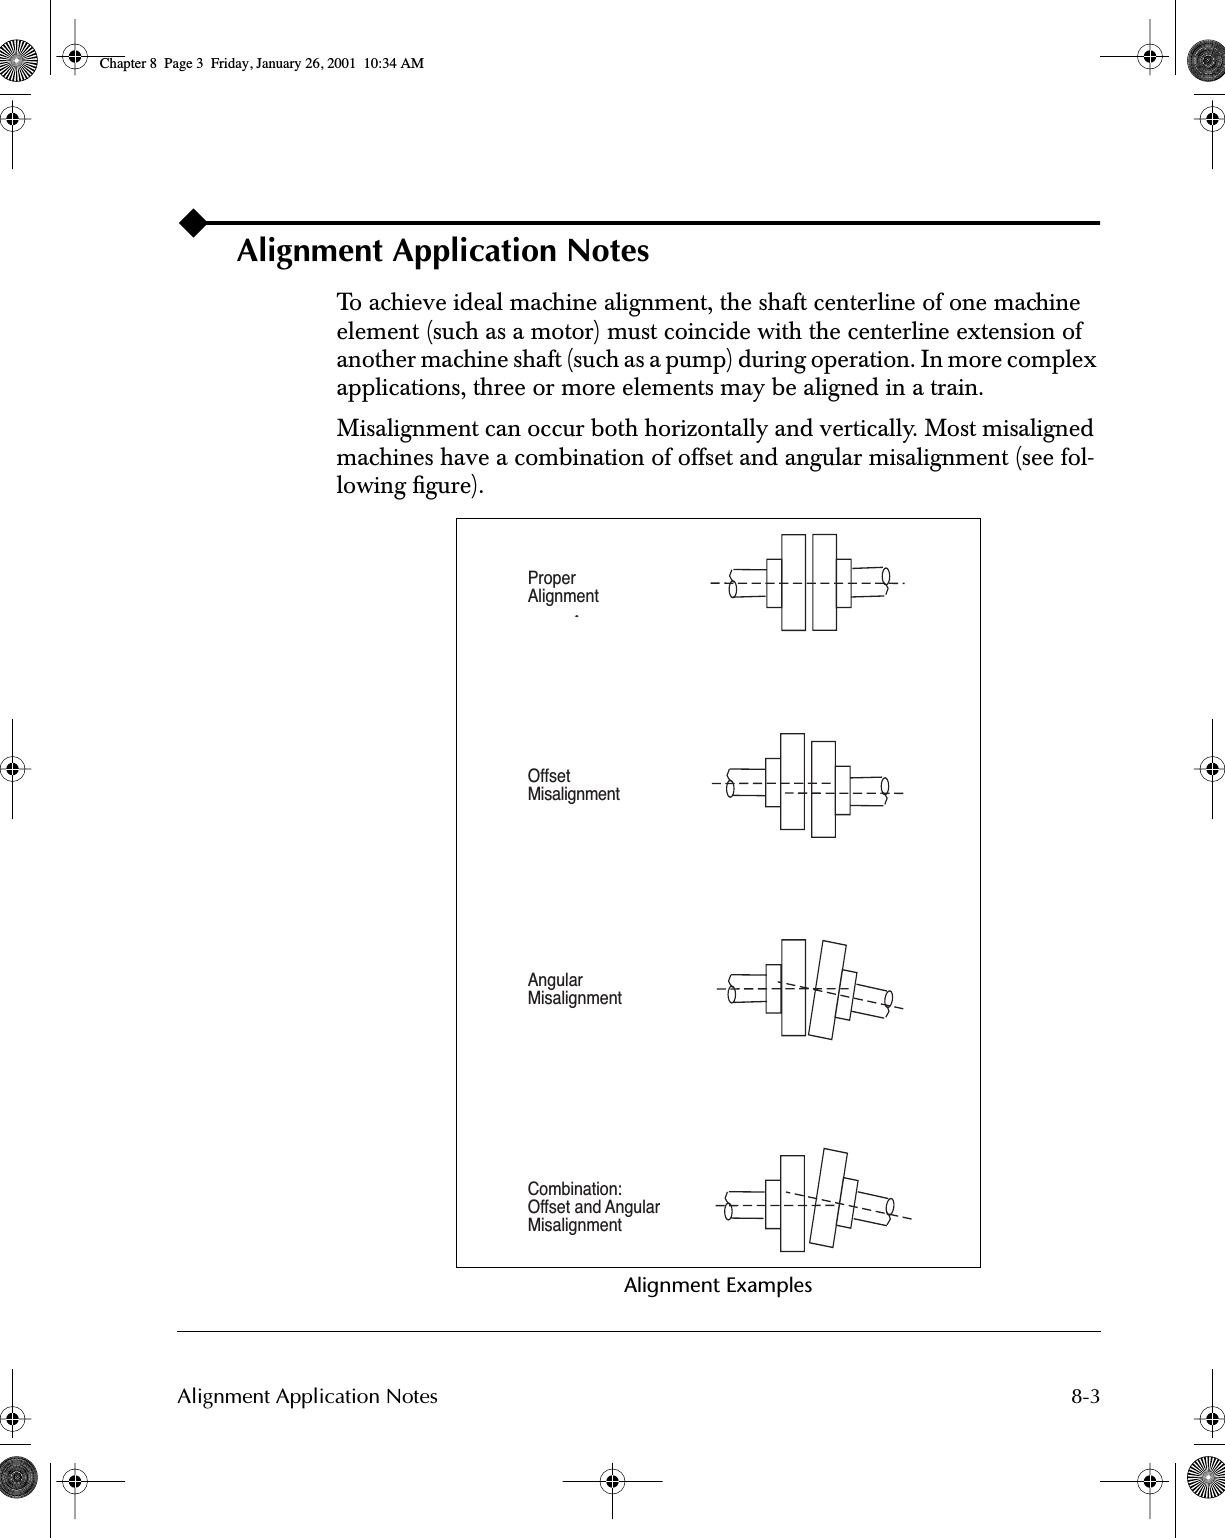  8-3Alignment Application Notes Alignment Application Notes To achieve ideal machine alignment, the shaft centerline of one machine element (such as a motor) must coincide with the centerline extension of another machine shaft (such as a pump) during operation. In more complex applications, three or more elements may be aligned in a train. Misalignment can occur both horizontally and vertically. Most misaligned machines have a combination of offset and angular misalignment (see fol-lowing ﬁgure). Alignment ExamplesProperAlignmentOffsetMisalignmentAngularMisalignmentCombination:Offset and AngularMisalignment Chapter 8  Page 3  Friday, January 26, 2001  10:34 AM